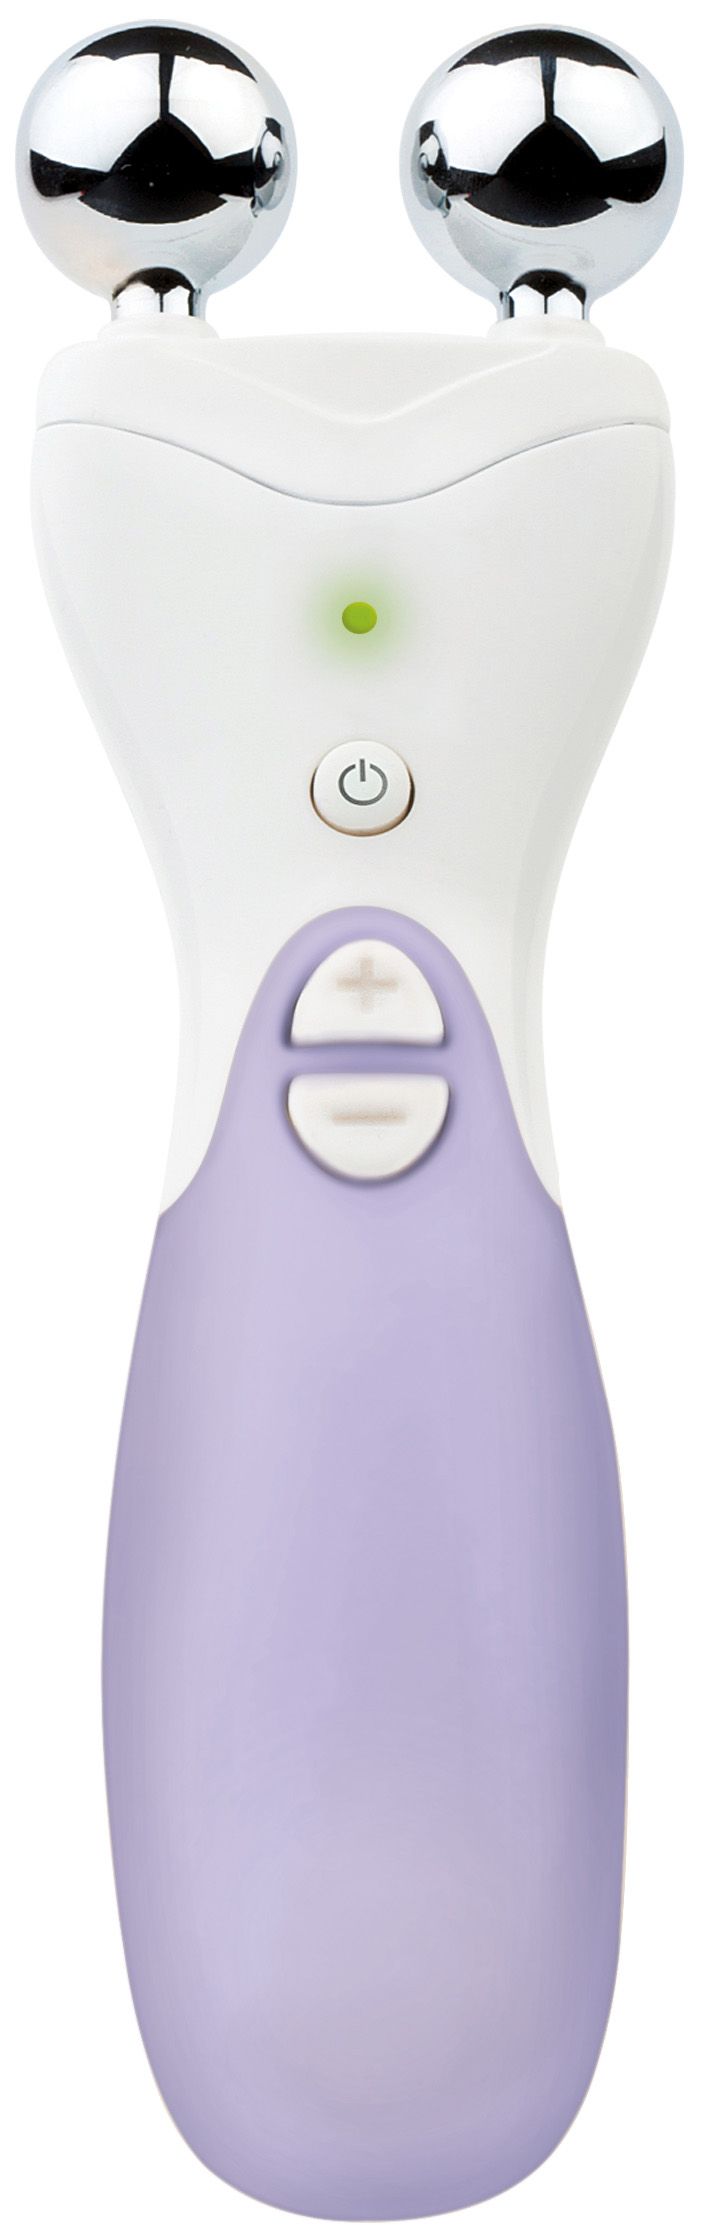 Rio 60 second face lift lavender hand set with chrome massage heads